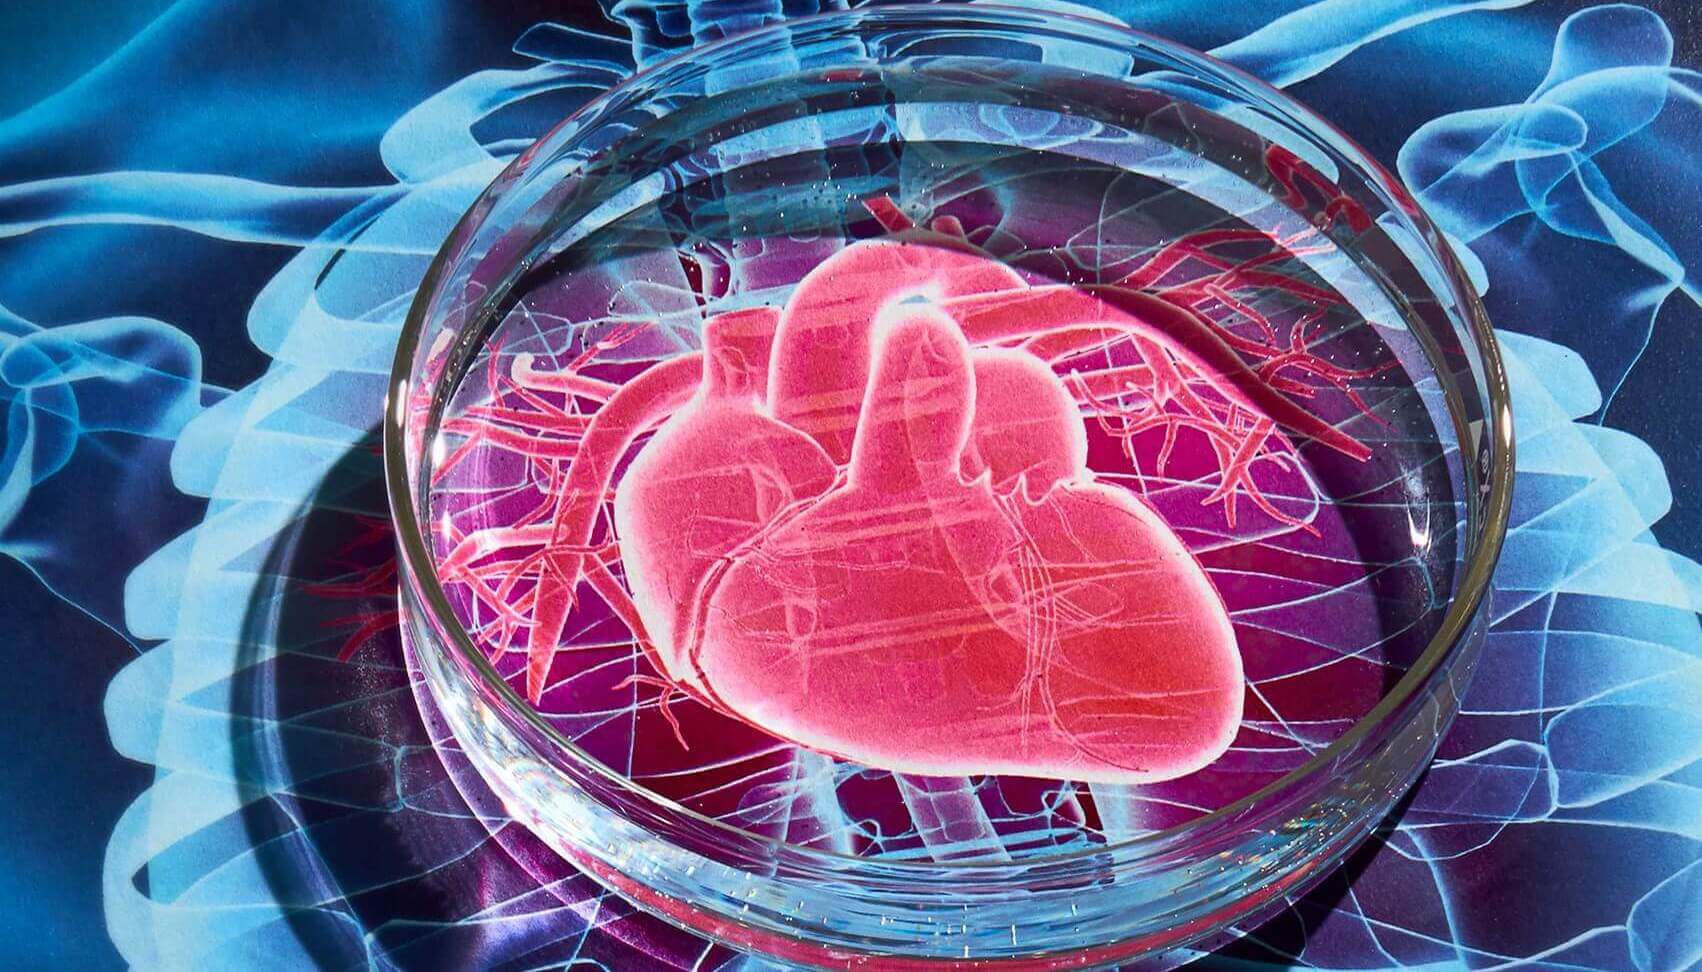 Stem cells restore heart not as we thought